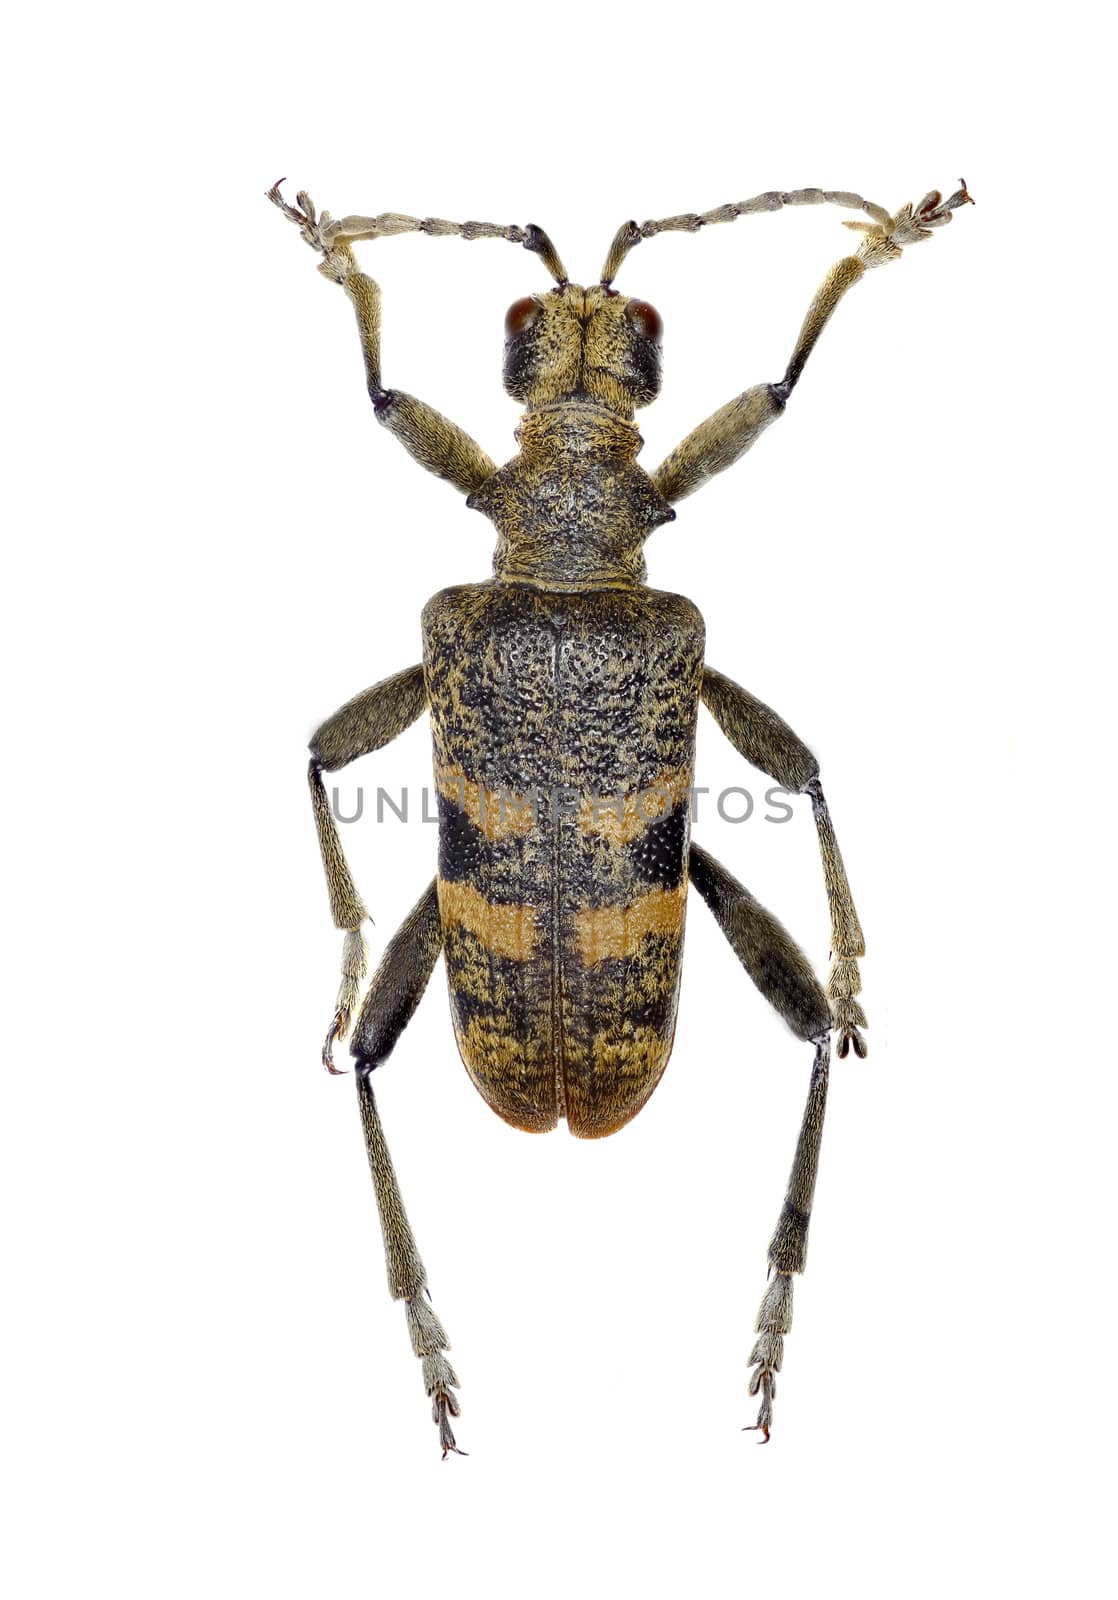 Blackspotted Pliers Support Beetle on white Background  -  Rhagium mordax (DeGeer, 1775) by gstalker